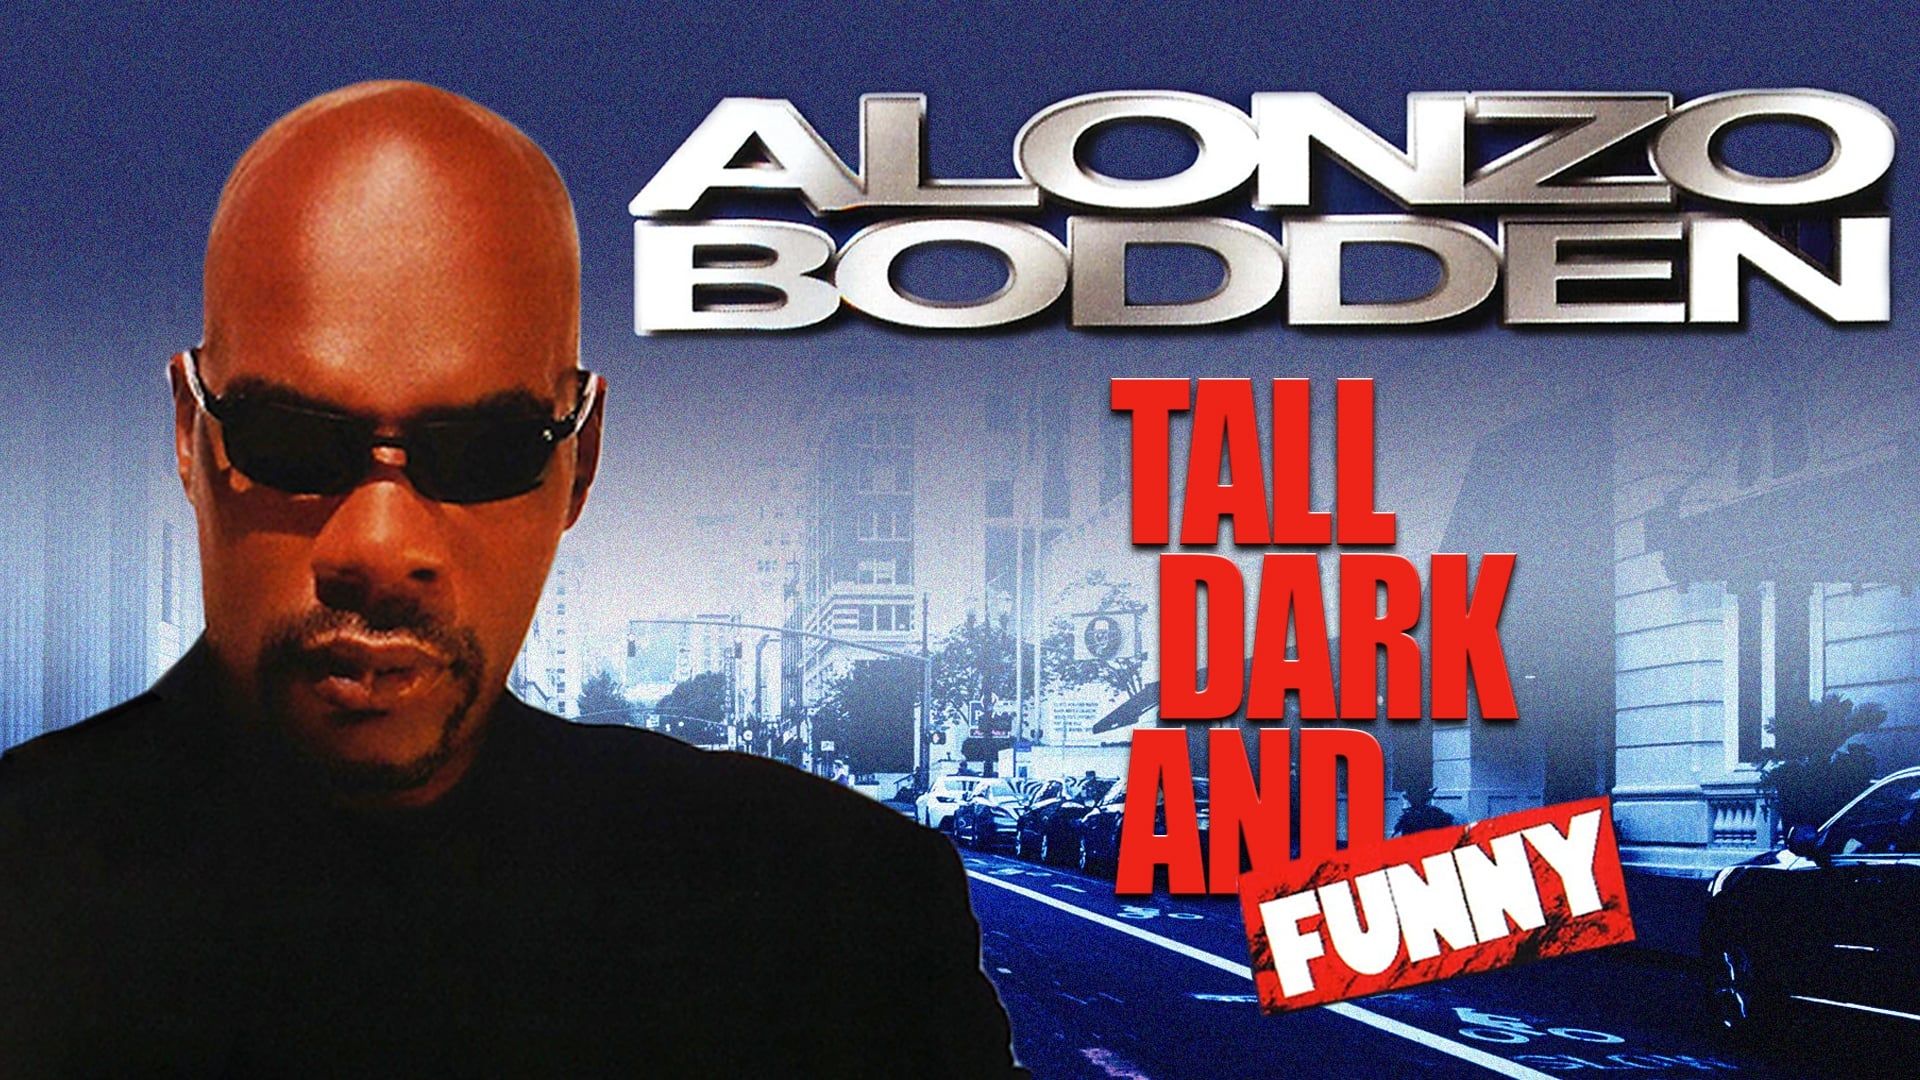 Alonzo Bodden: Tall, Dark, and Funny background